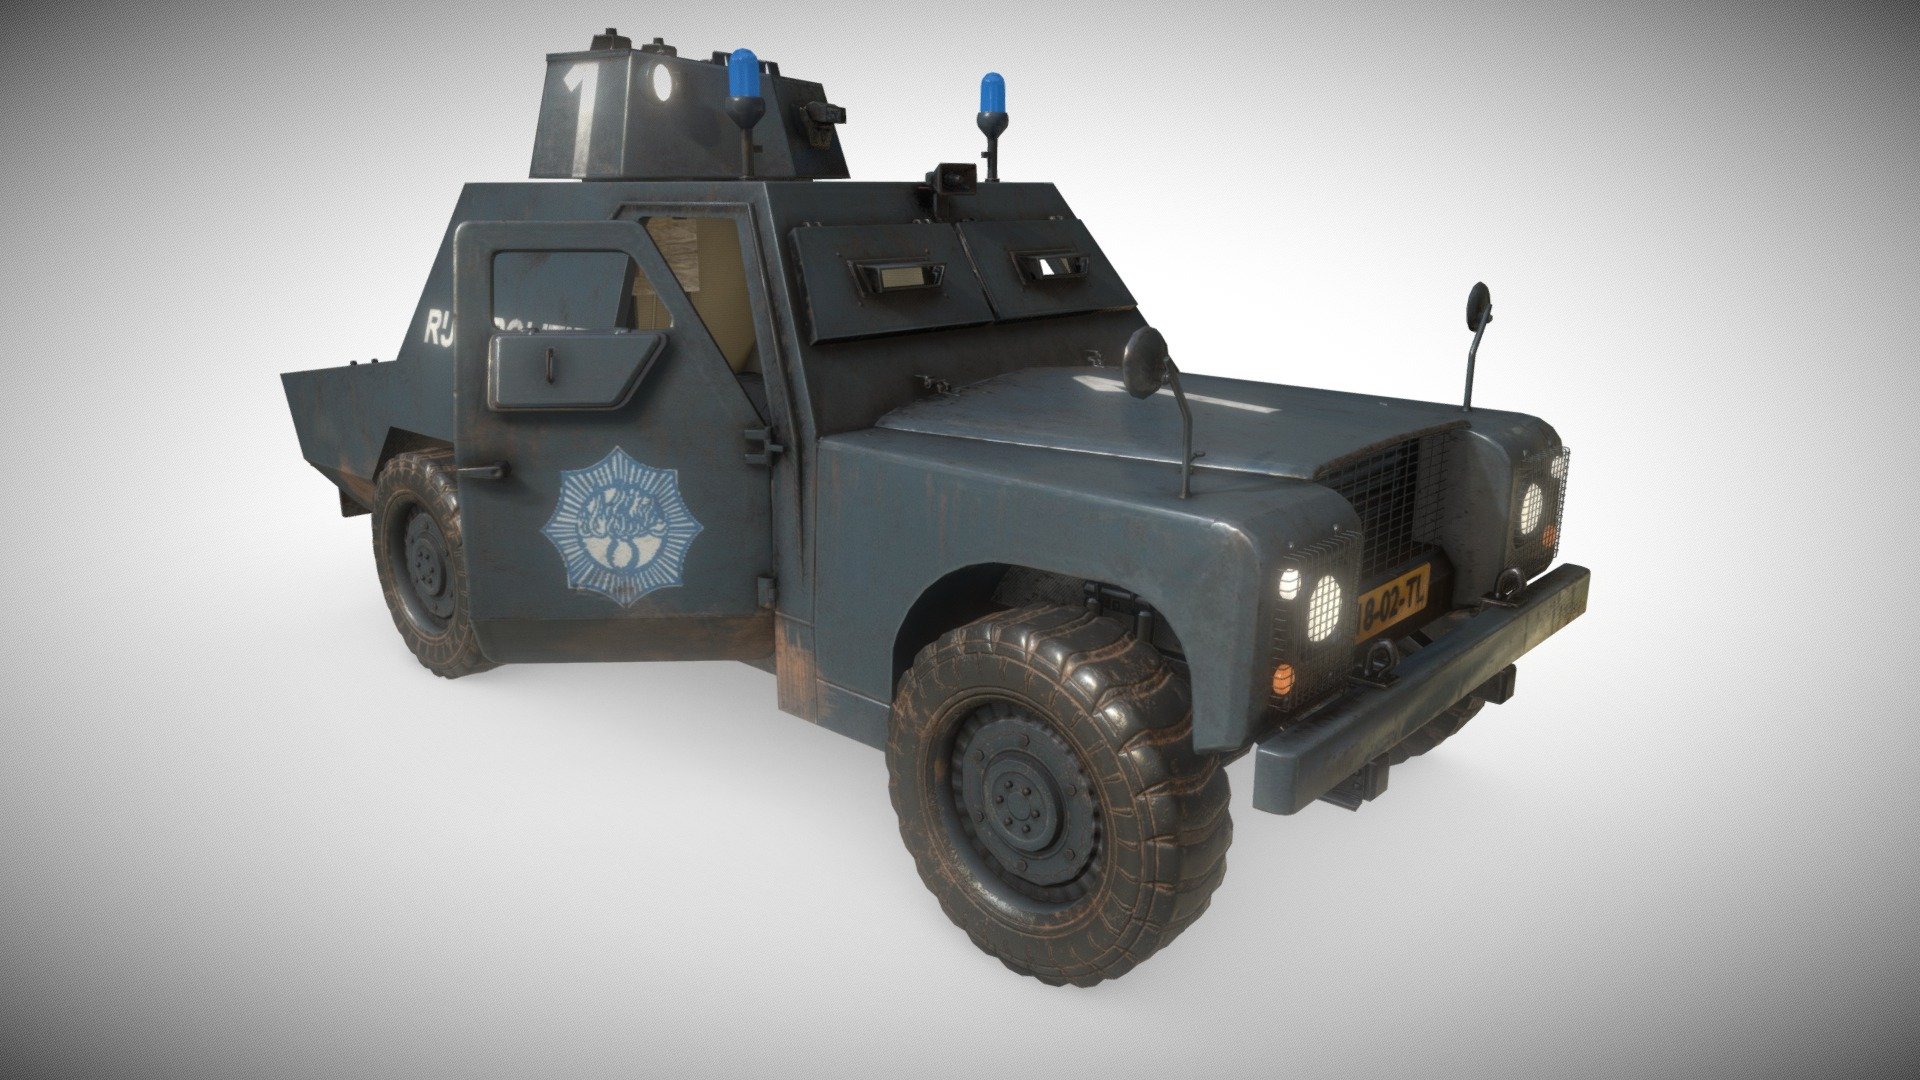 I originally started this as a project for 2017 hum3d vehicle challenge. I decided to revisit it after seeing Karol Miklas's level 80 article. 

modeled in blender and textured in substance painter 3d model